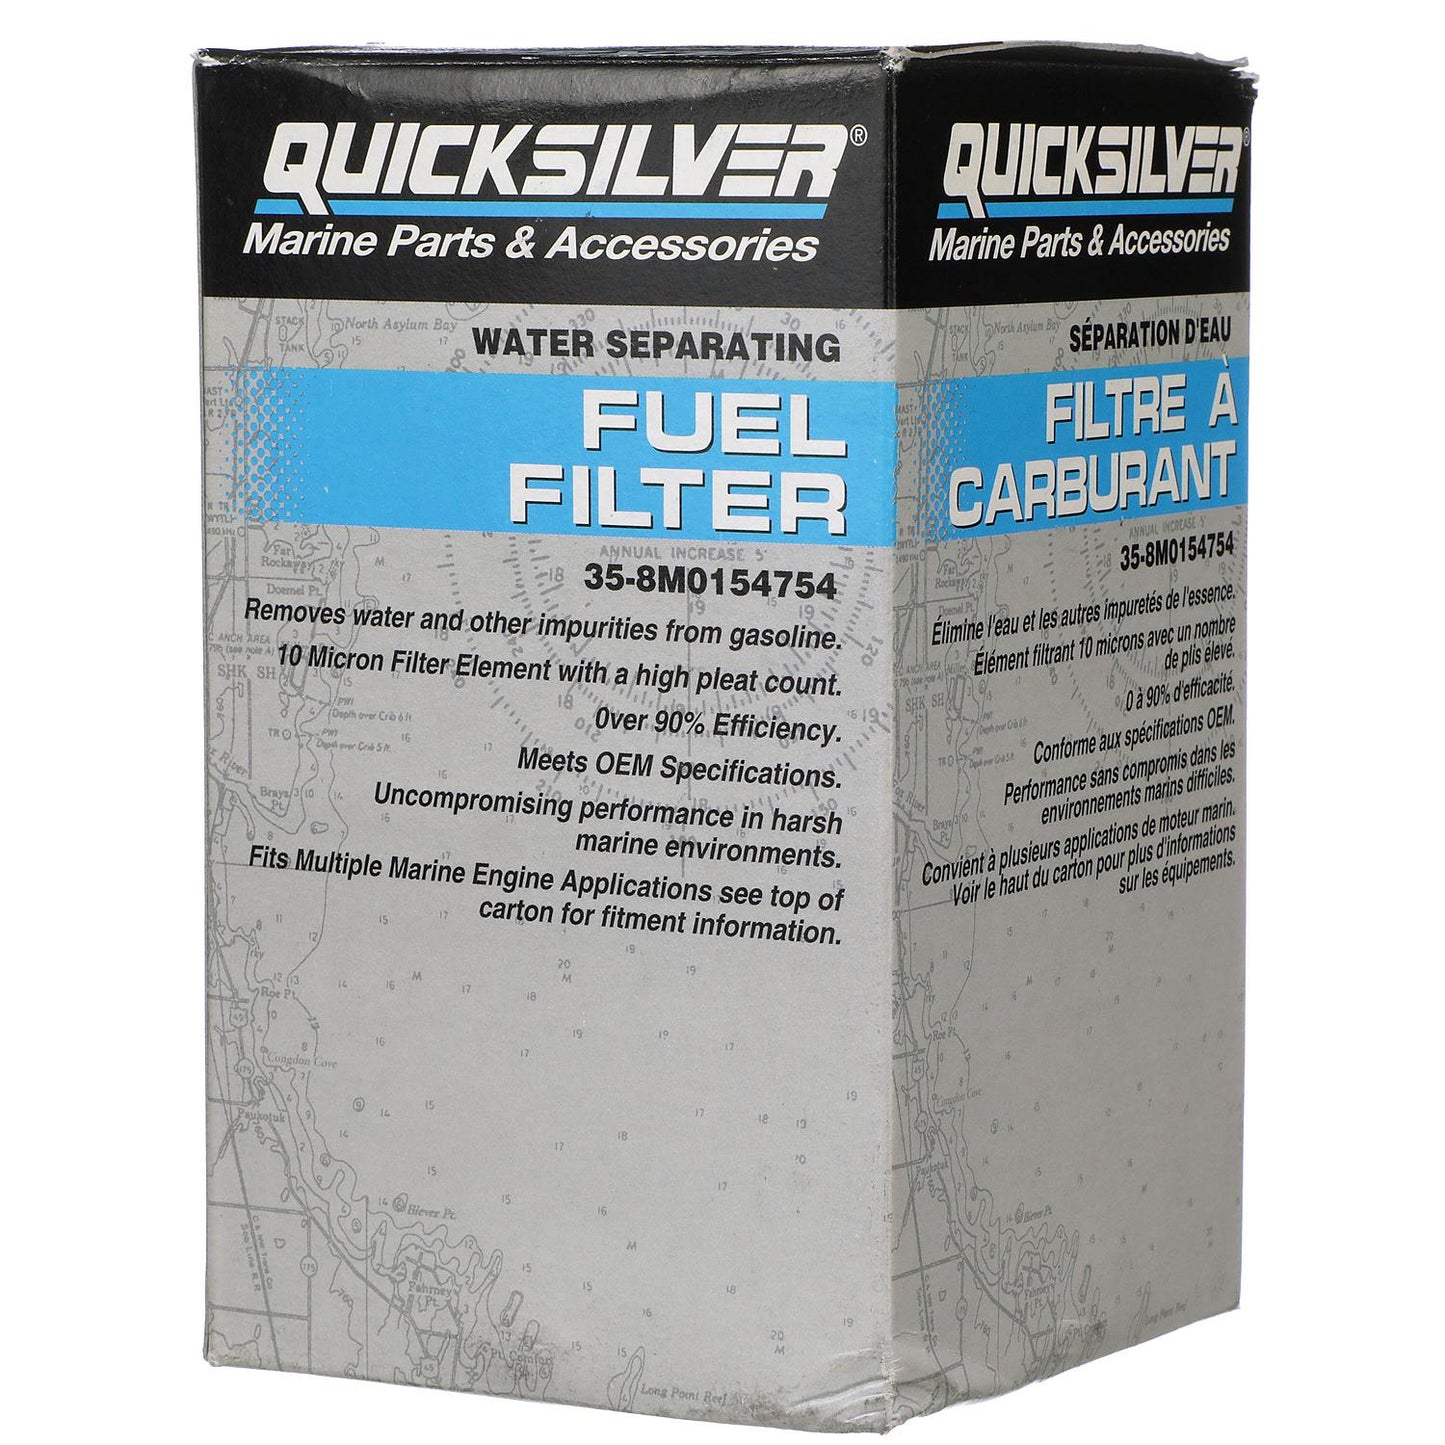 Quicksilver 8M0154754 Water Separating Fuel Filter for Select Yamaha 2-Stroke and 4-Stroke Outboards